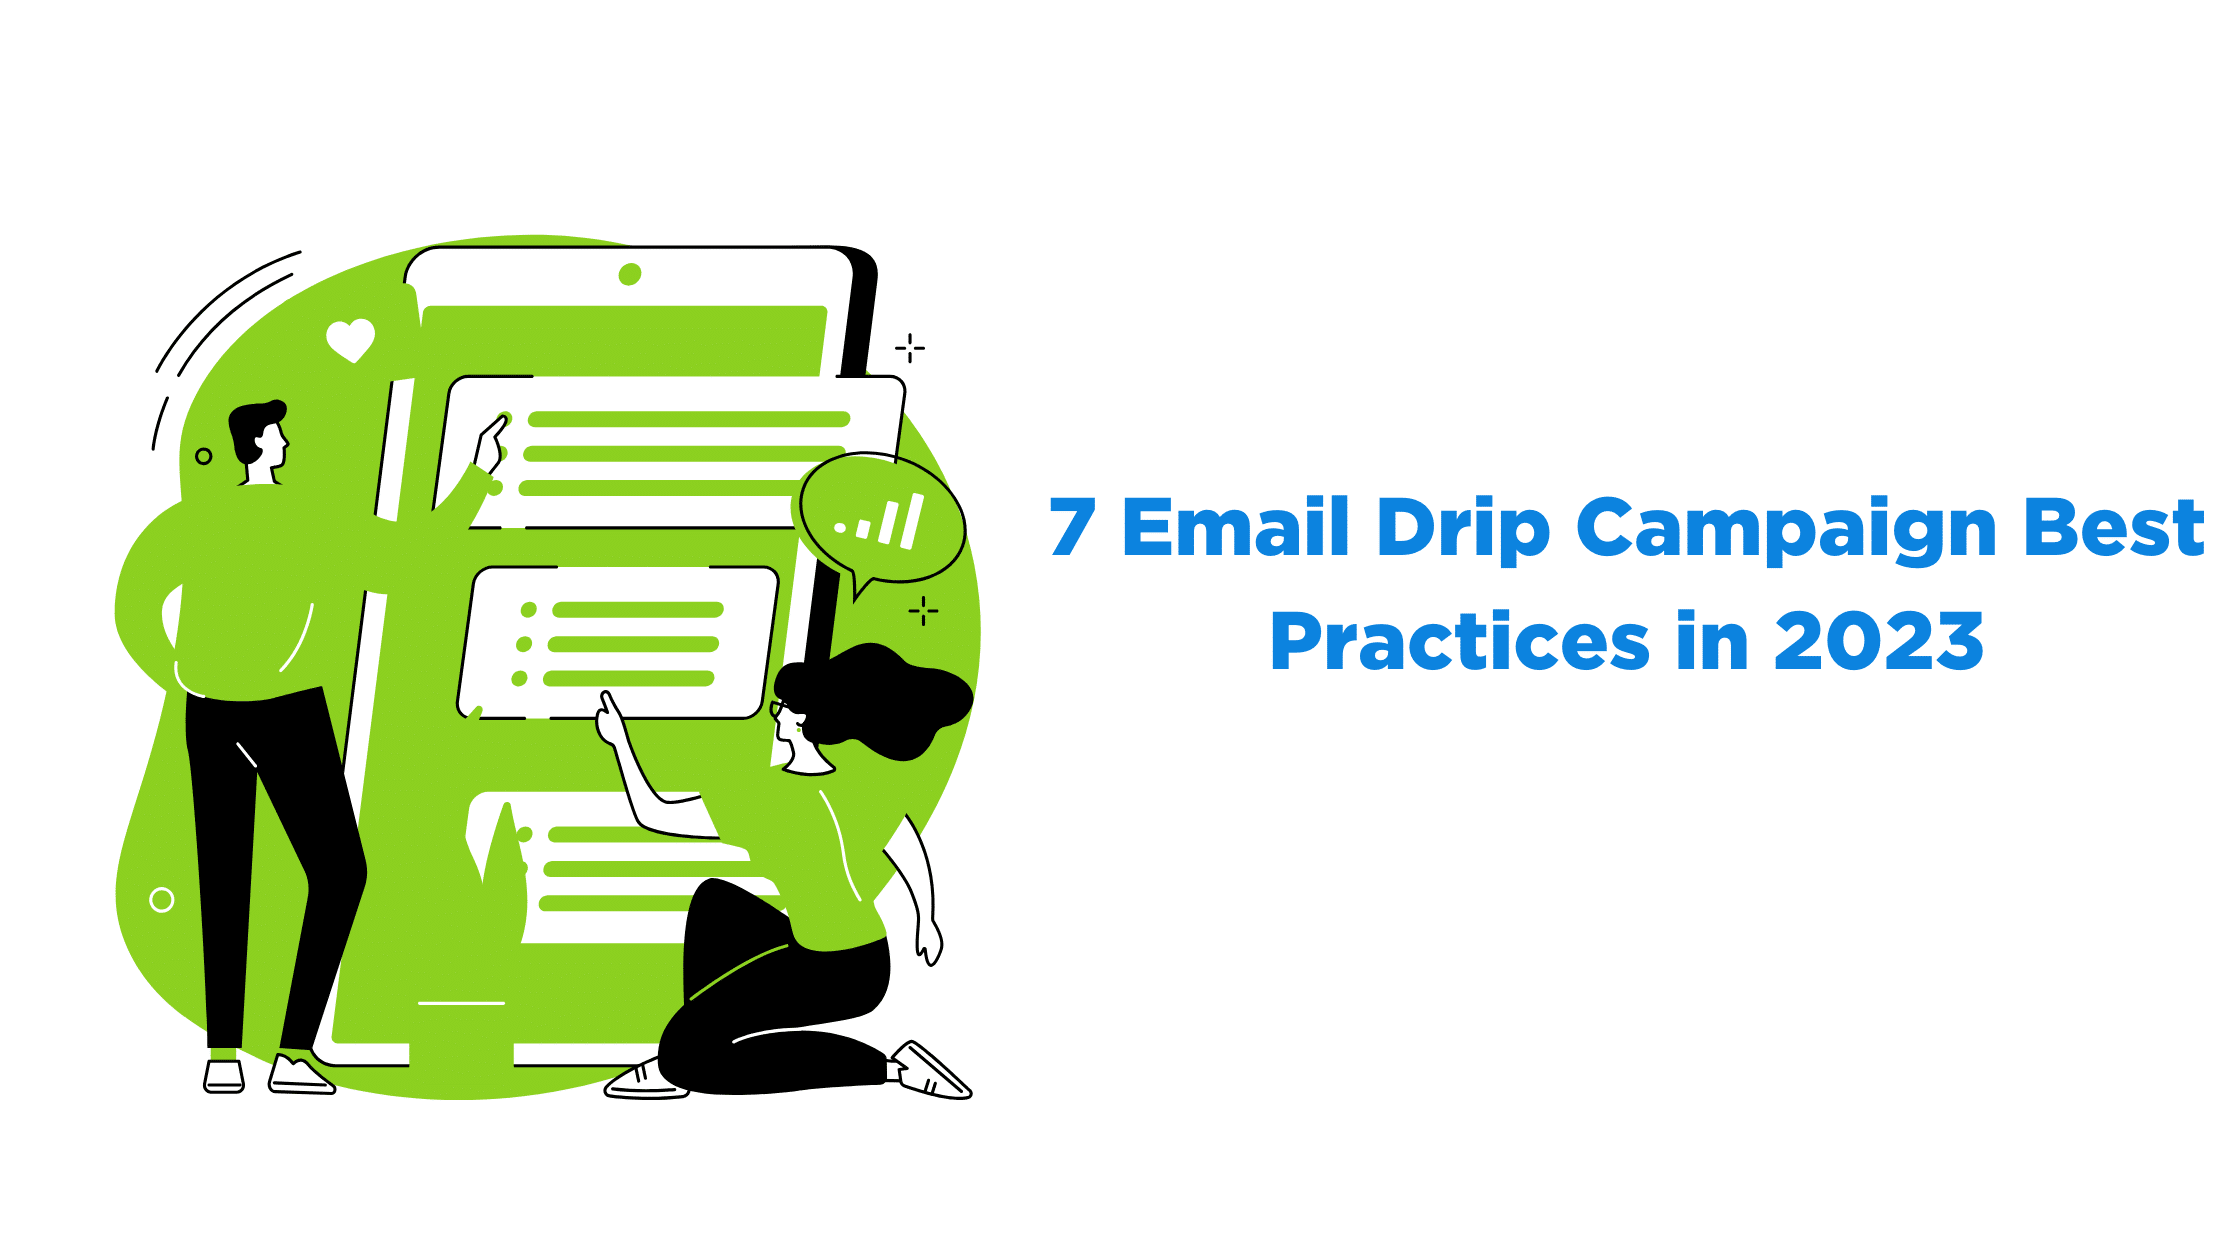 7 Email Drip Campaign Best Practices